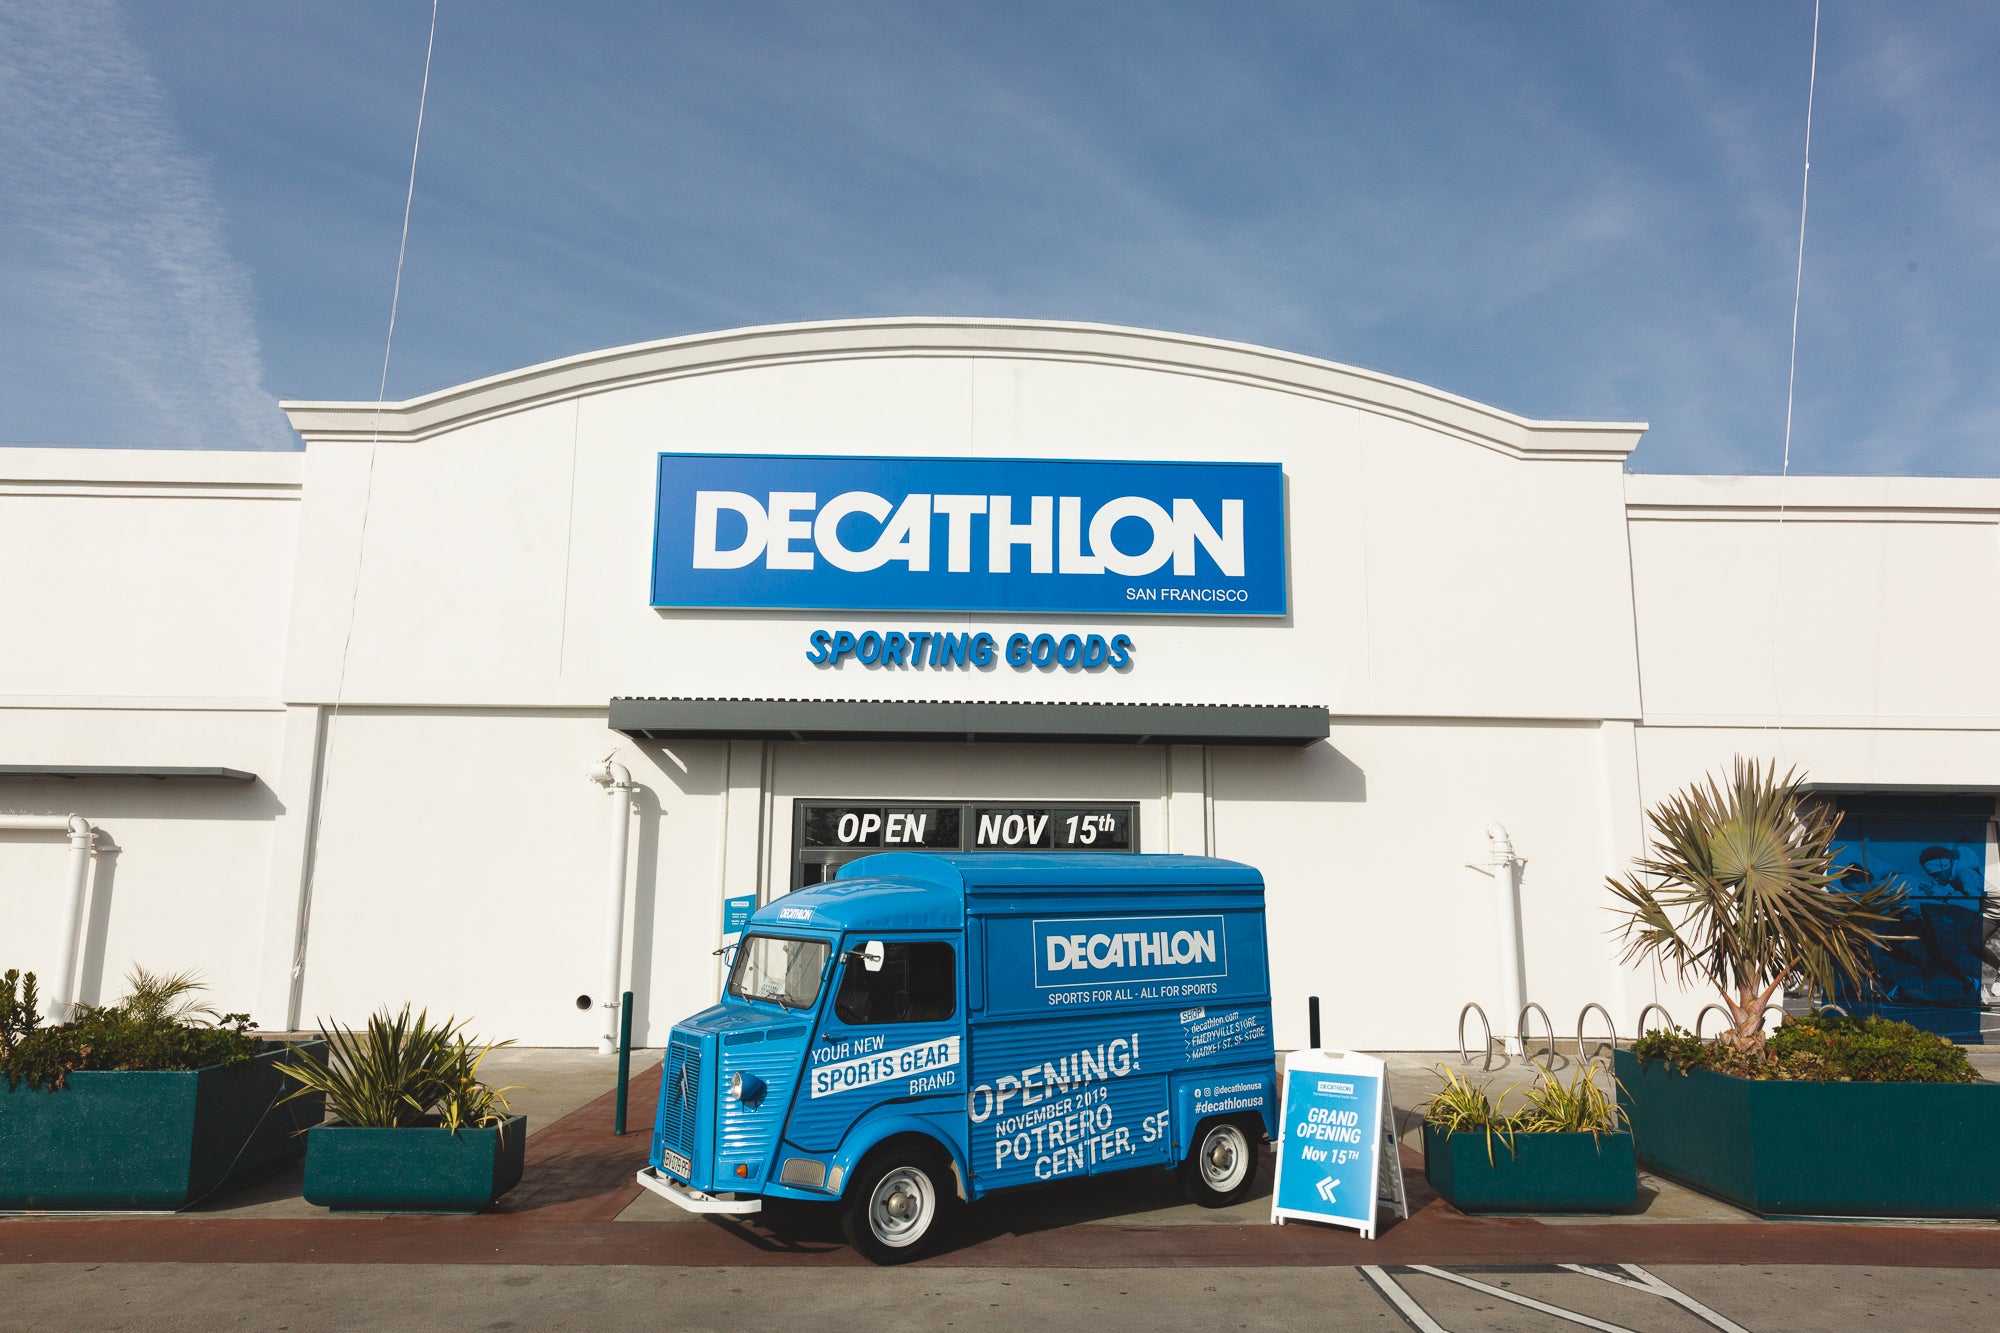 Decathlon Set to Open New Store in San Francisco, Announces